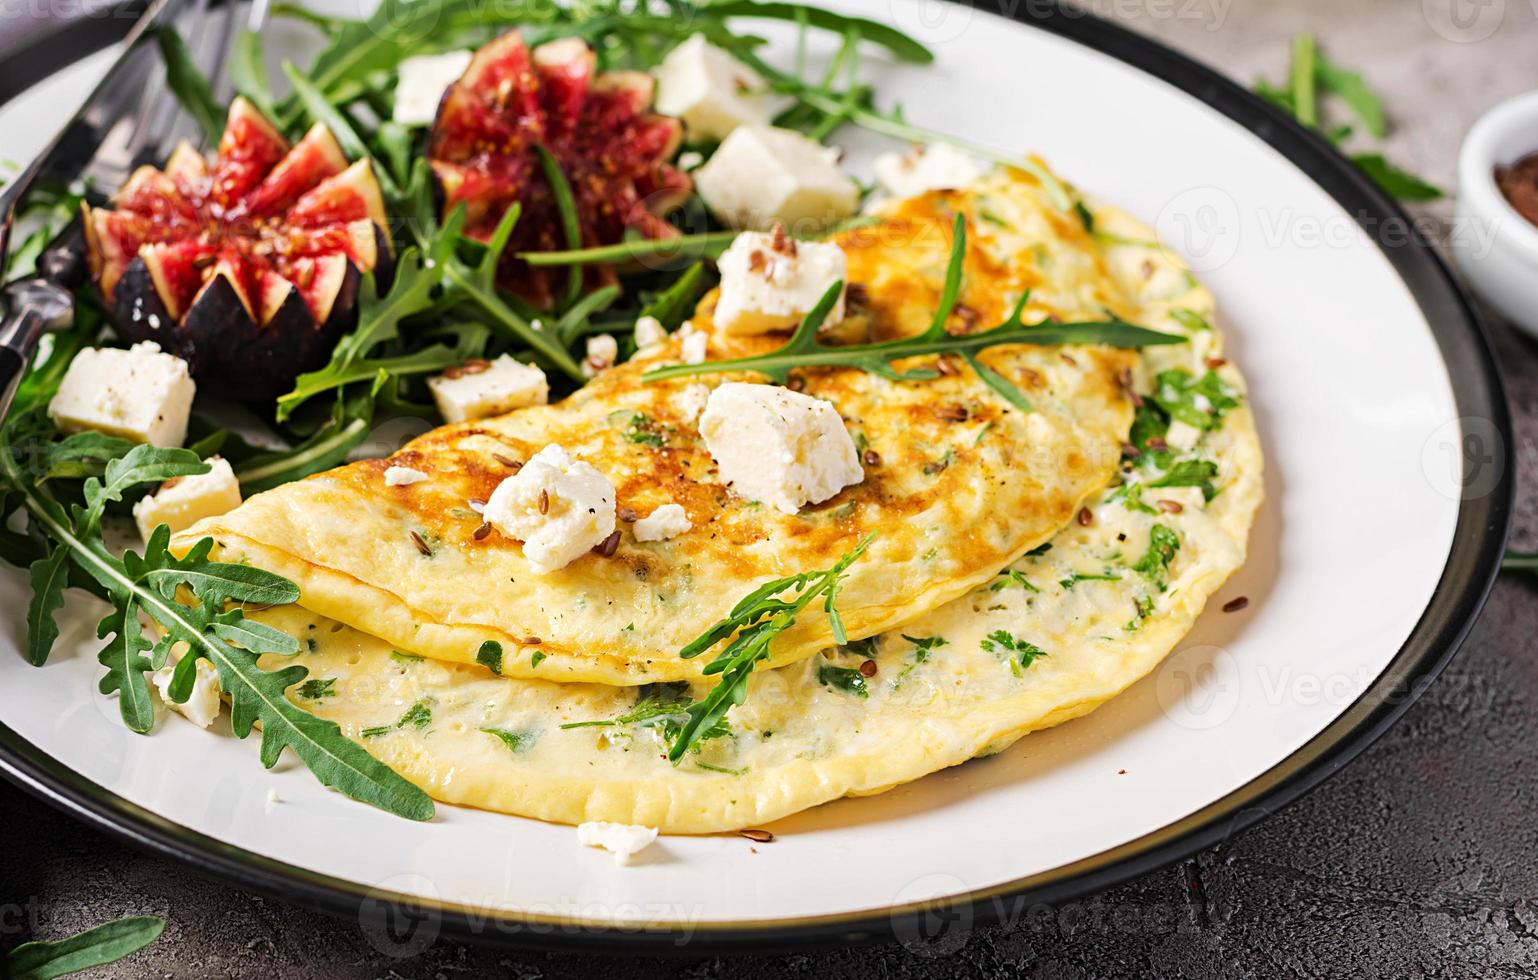 Omelette with feta cheese, parsley and salad with figs, arugula on white plate. Frittata - italian omelet. photo